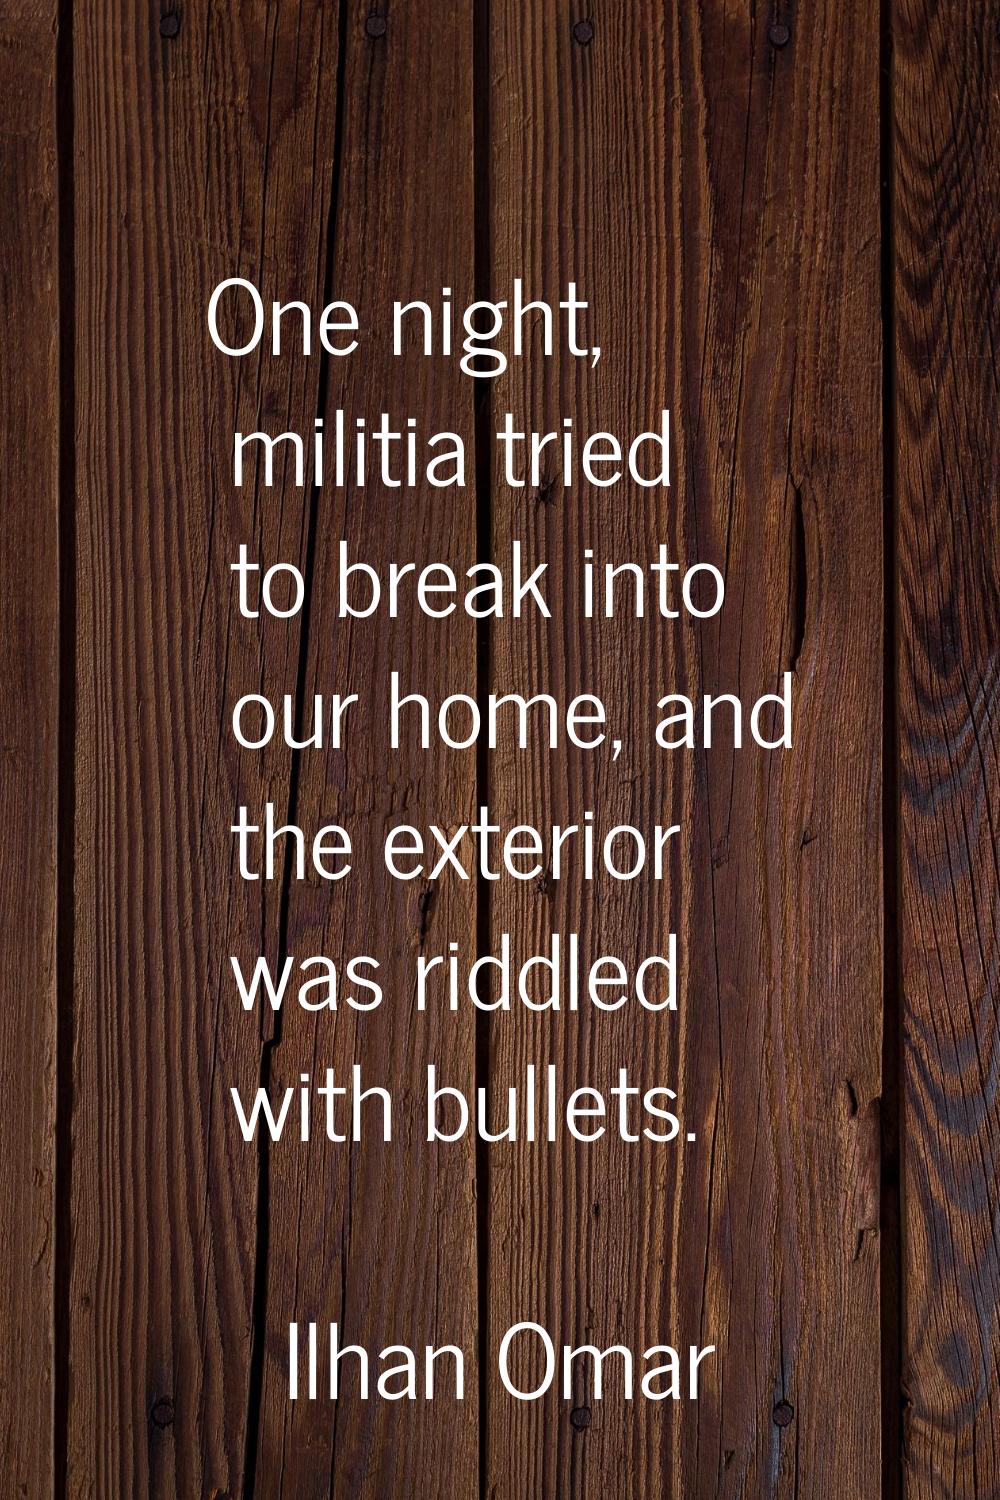 One night, militia tried to break into our home, and the exterior was riddled with bullets.